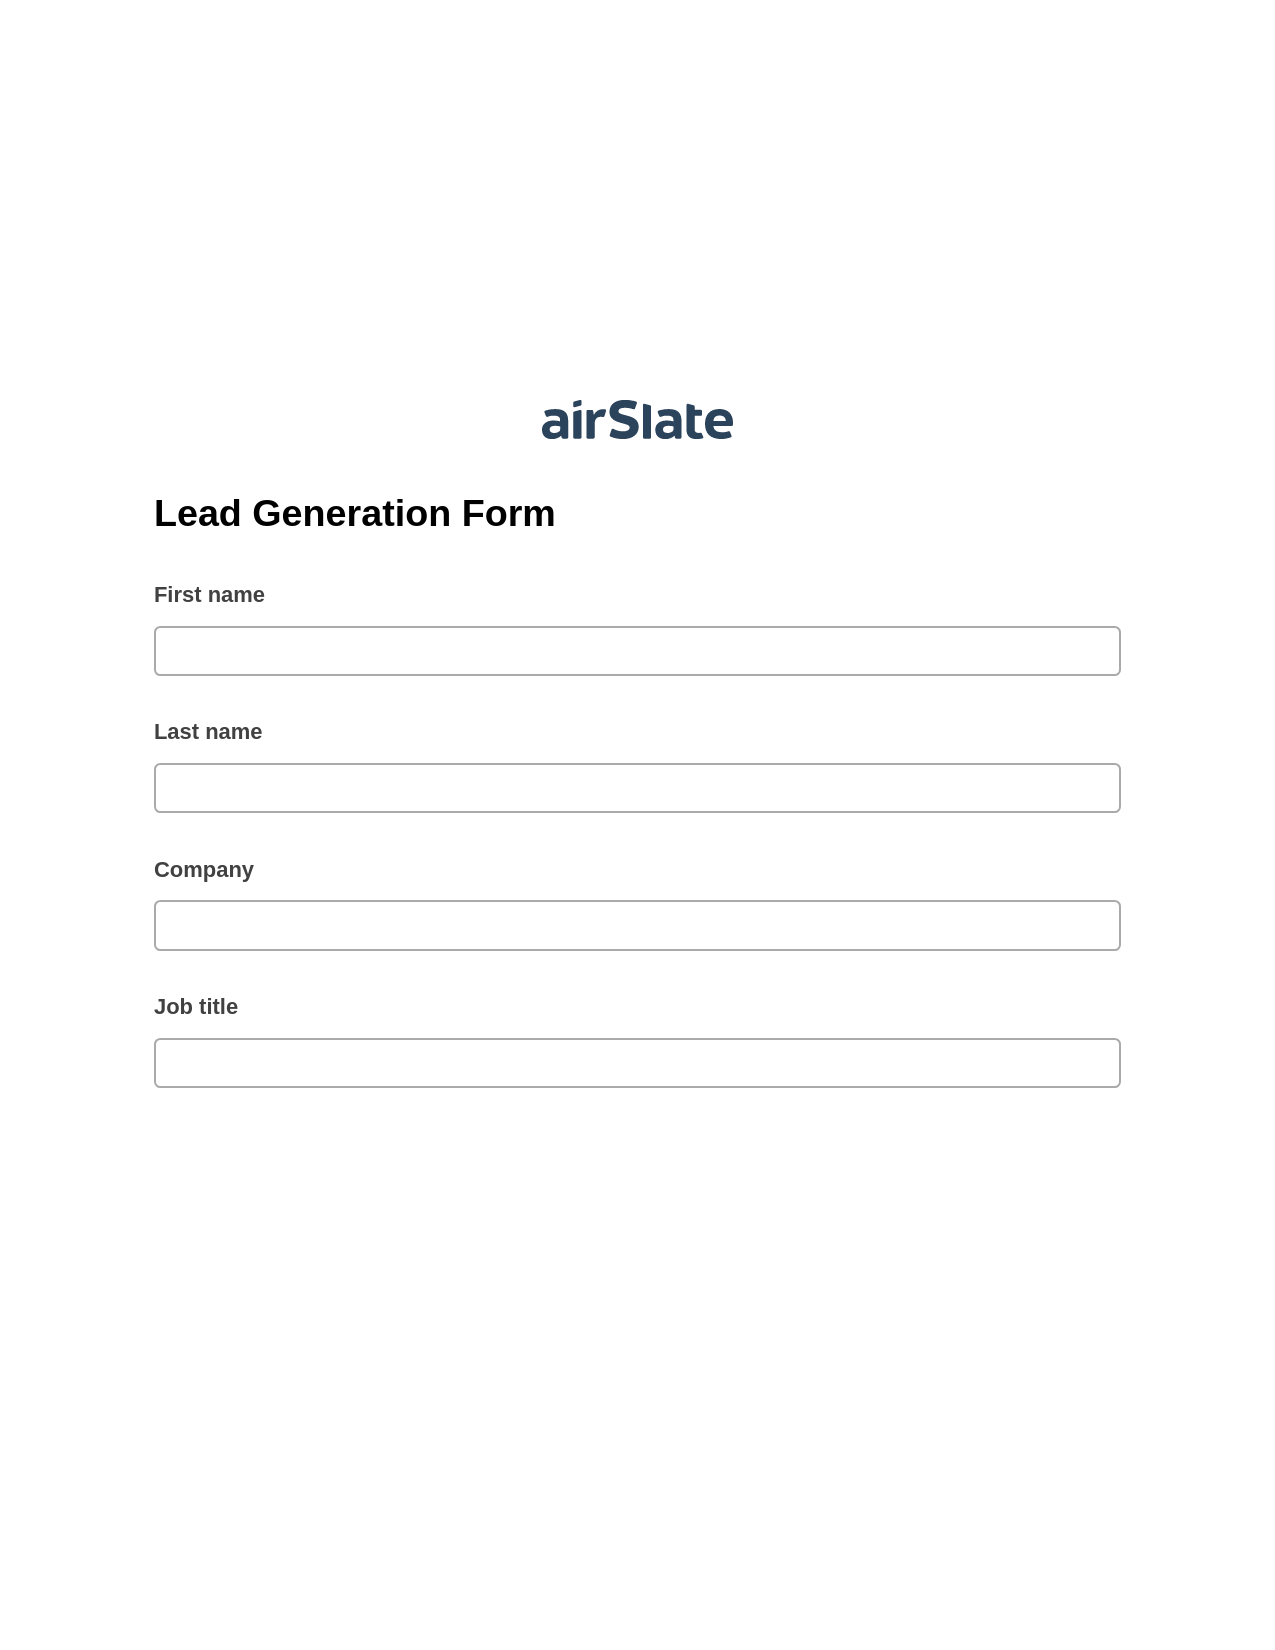 Lead Generation Form Pre-fill from Google Sheets Bot, Send a Slate to Salesforce Contact Bot, Archive to Google Drive Bot